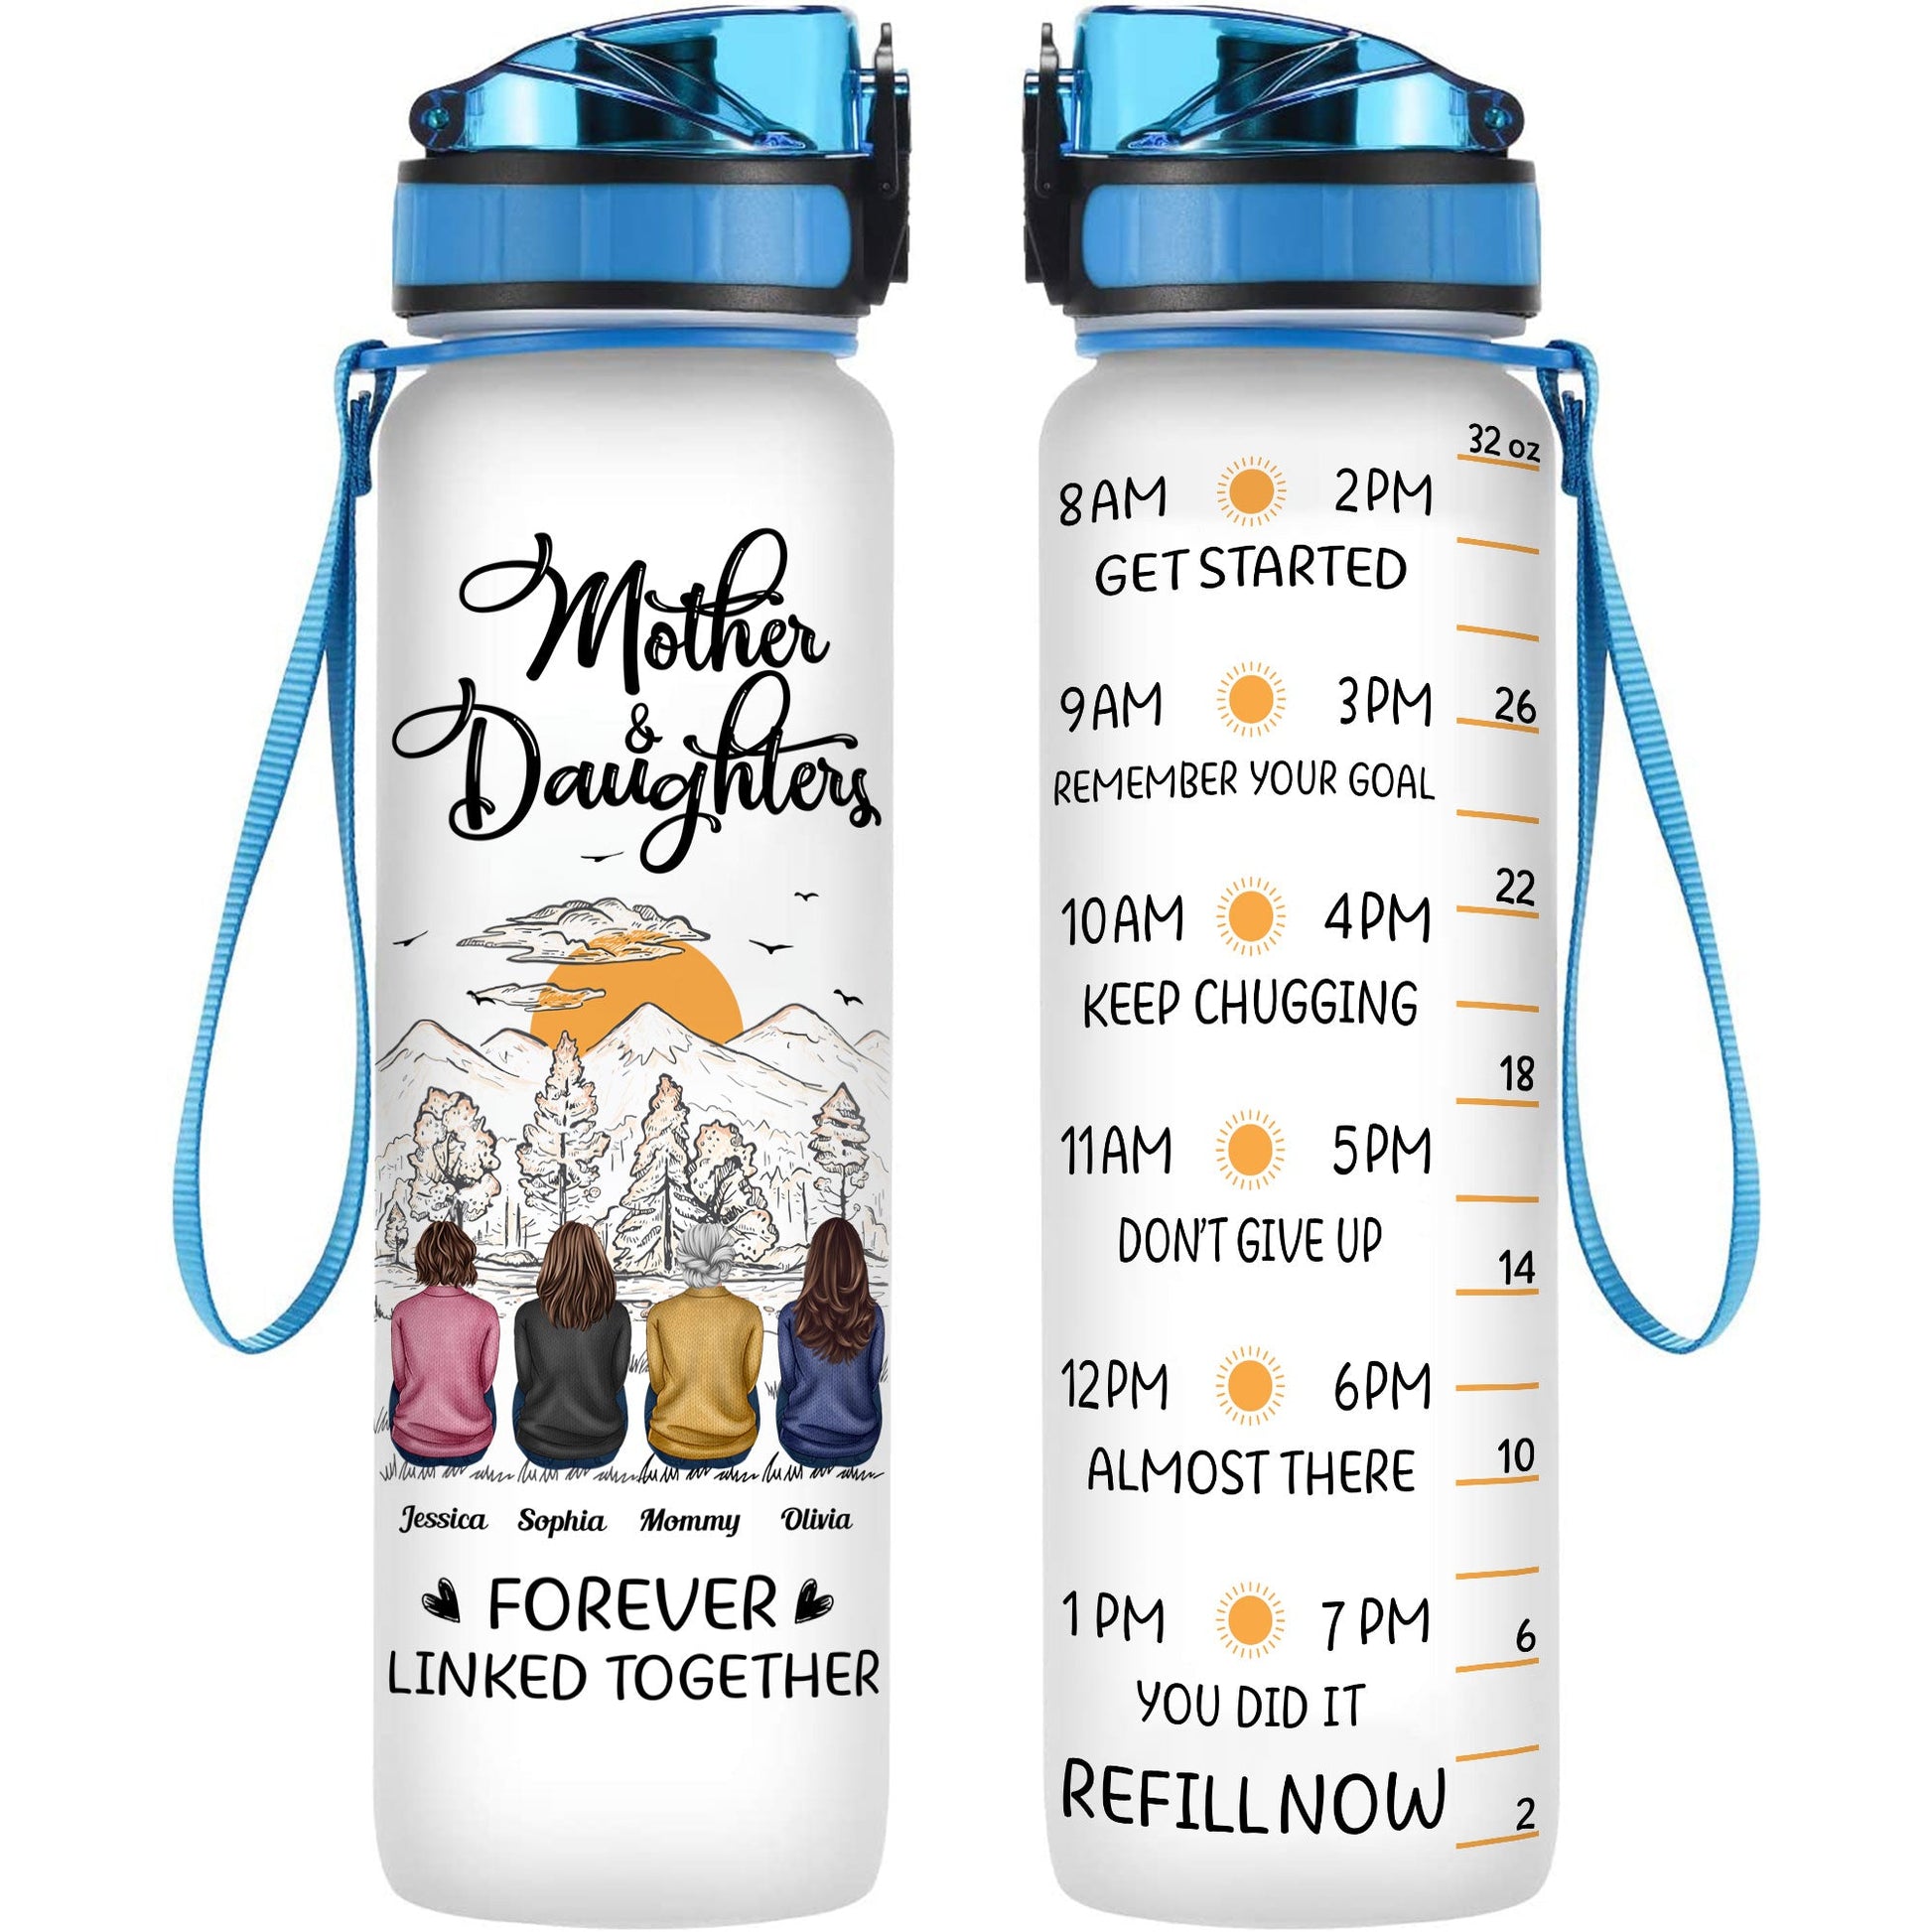 Drink Your Water Right Meow - Personalized Water Bottle With Time